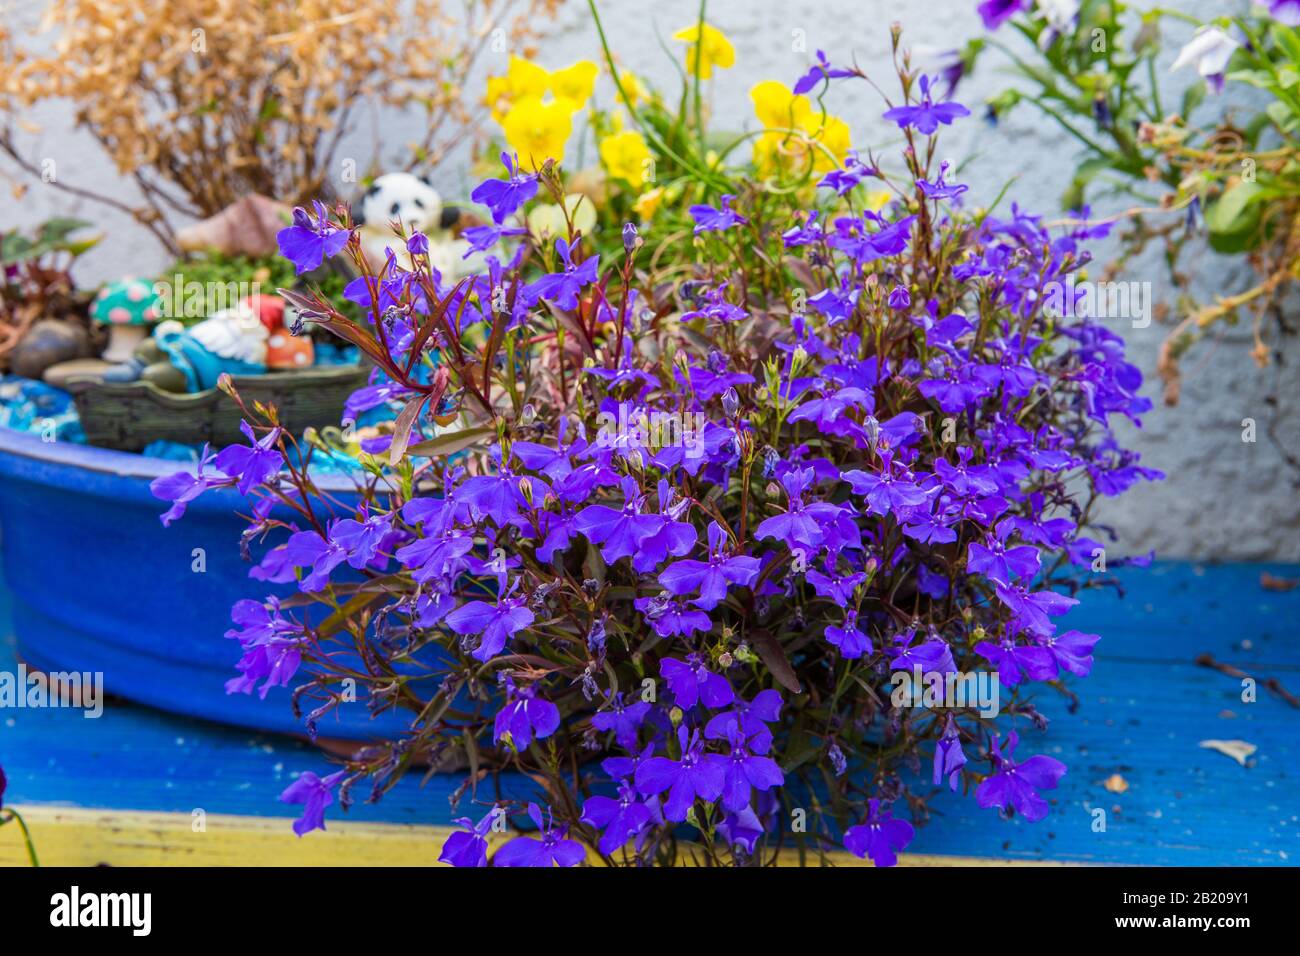 Lobelia erinus 'Crystal Palace' growing in a small fairy garden blue container  . Stock Photo